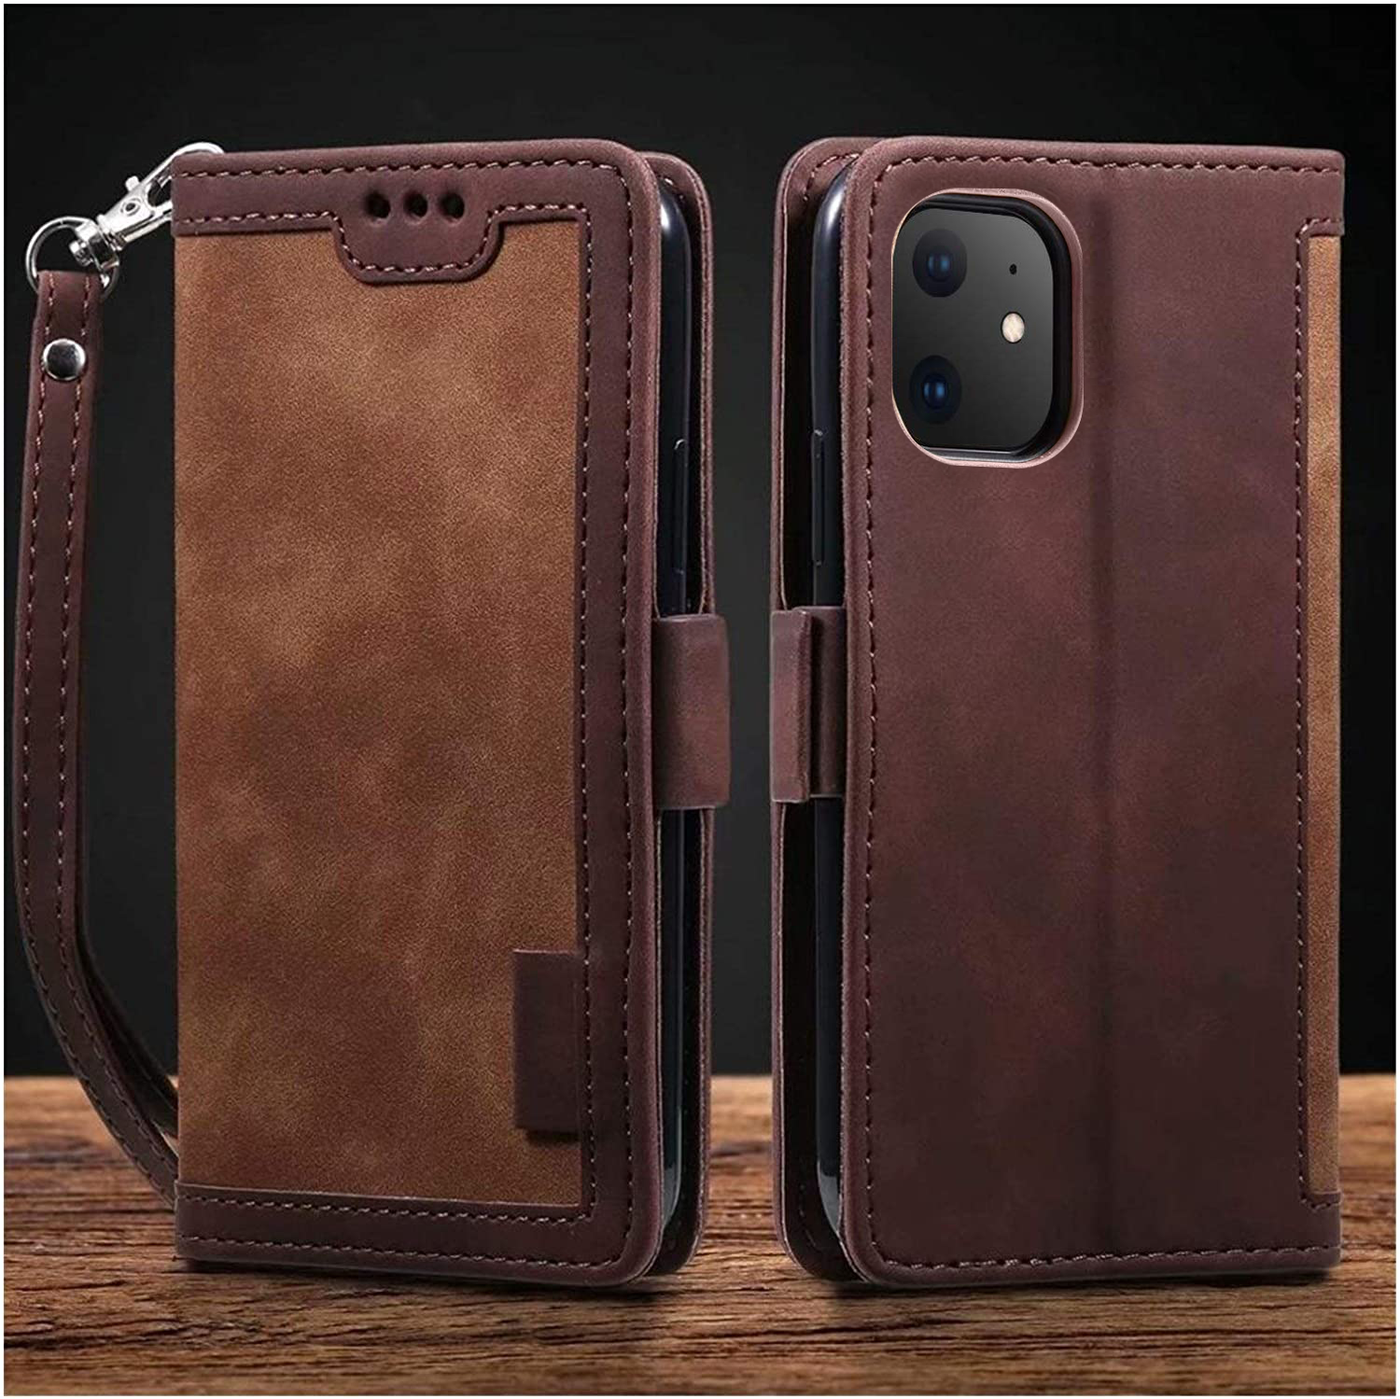 Apple iPhone 11 Coffee color leather wallet flip cover case By excelsior